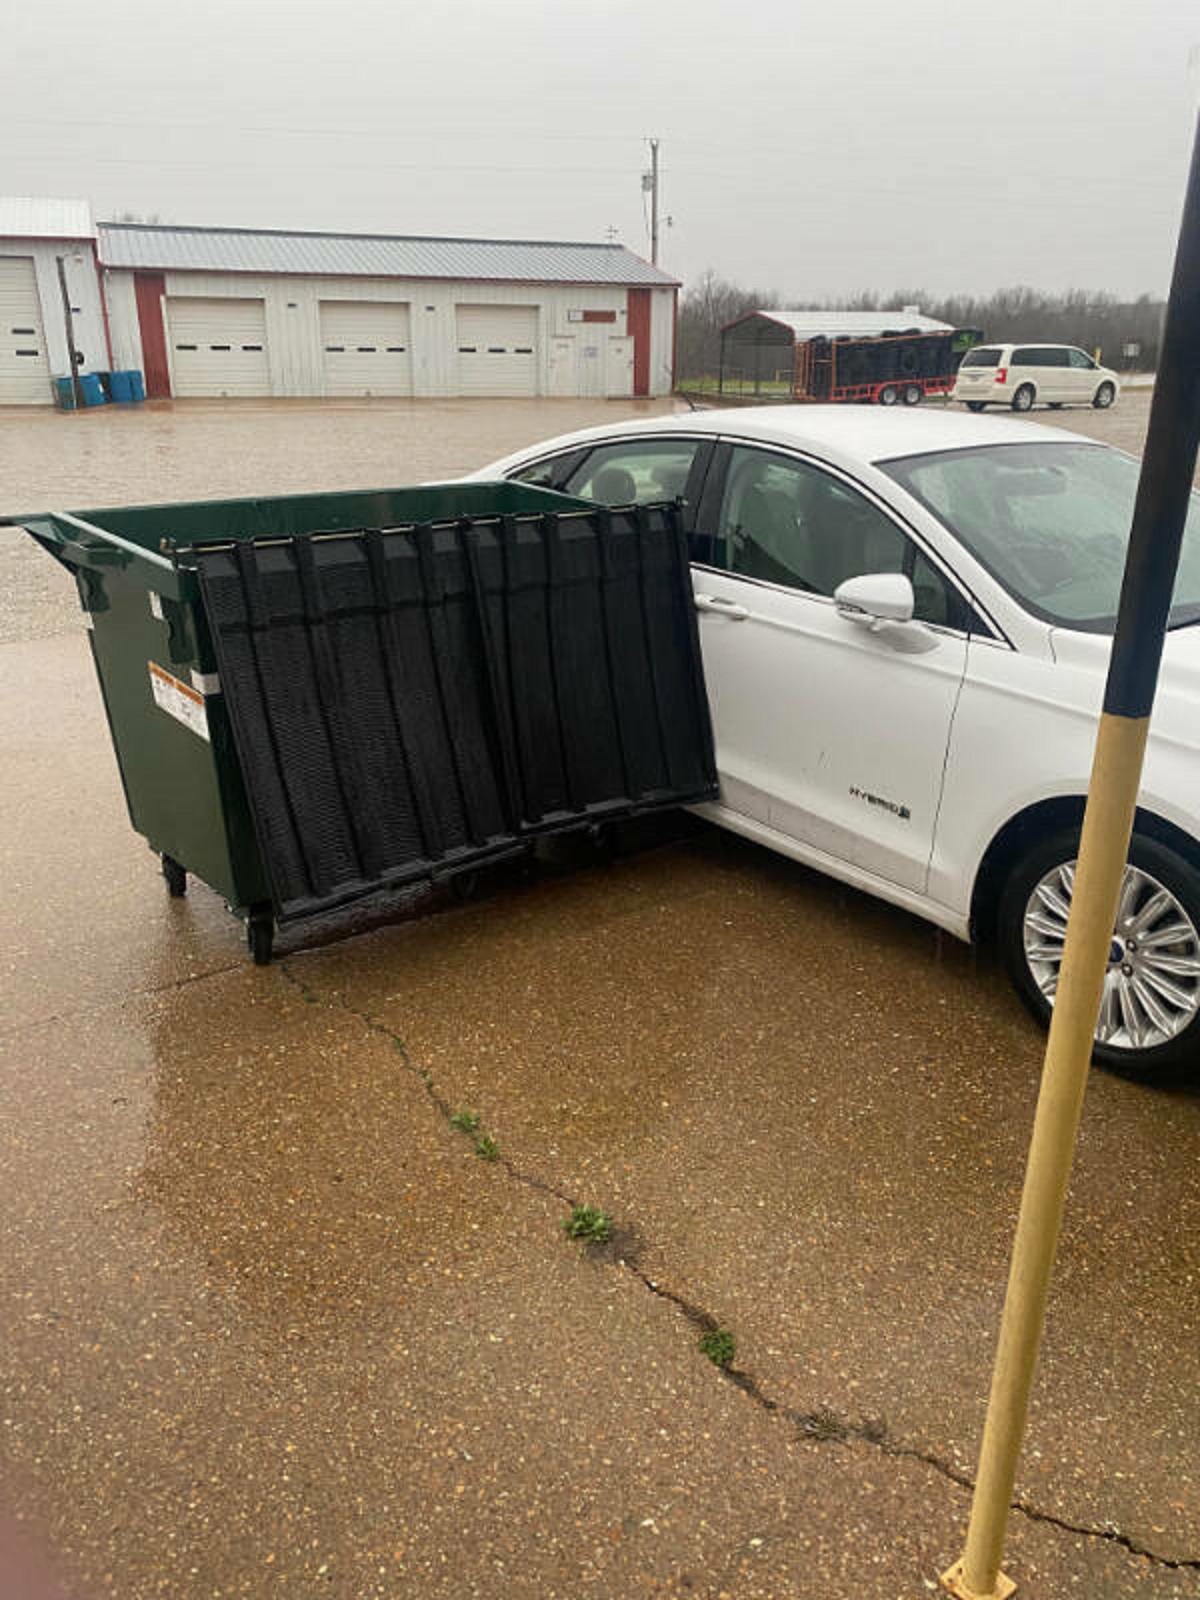 “We had a bad storm and the dumpster at work blew into my car”